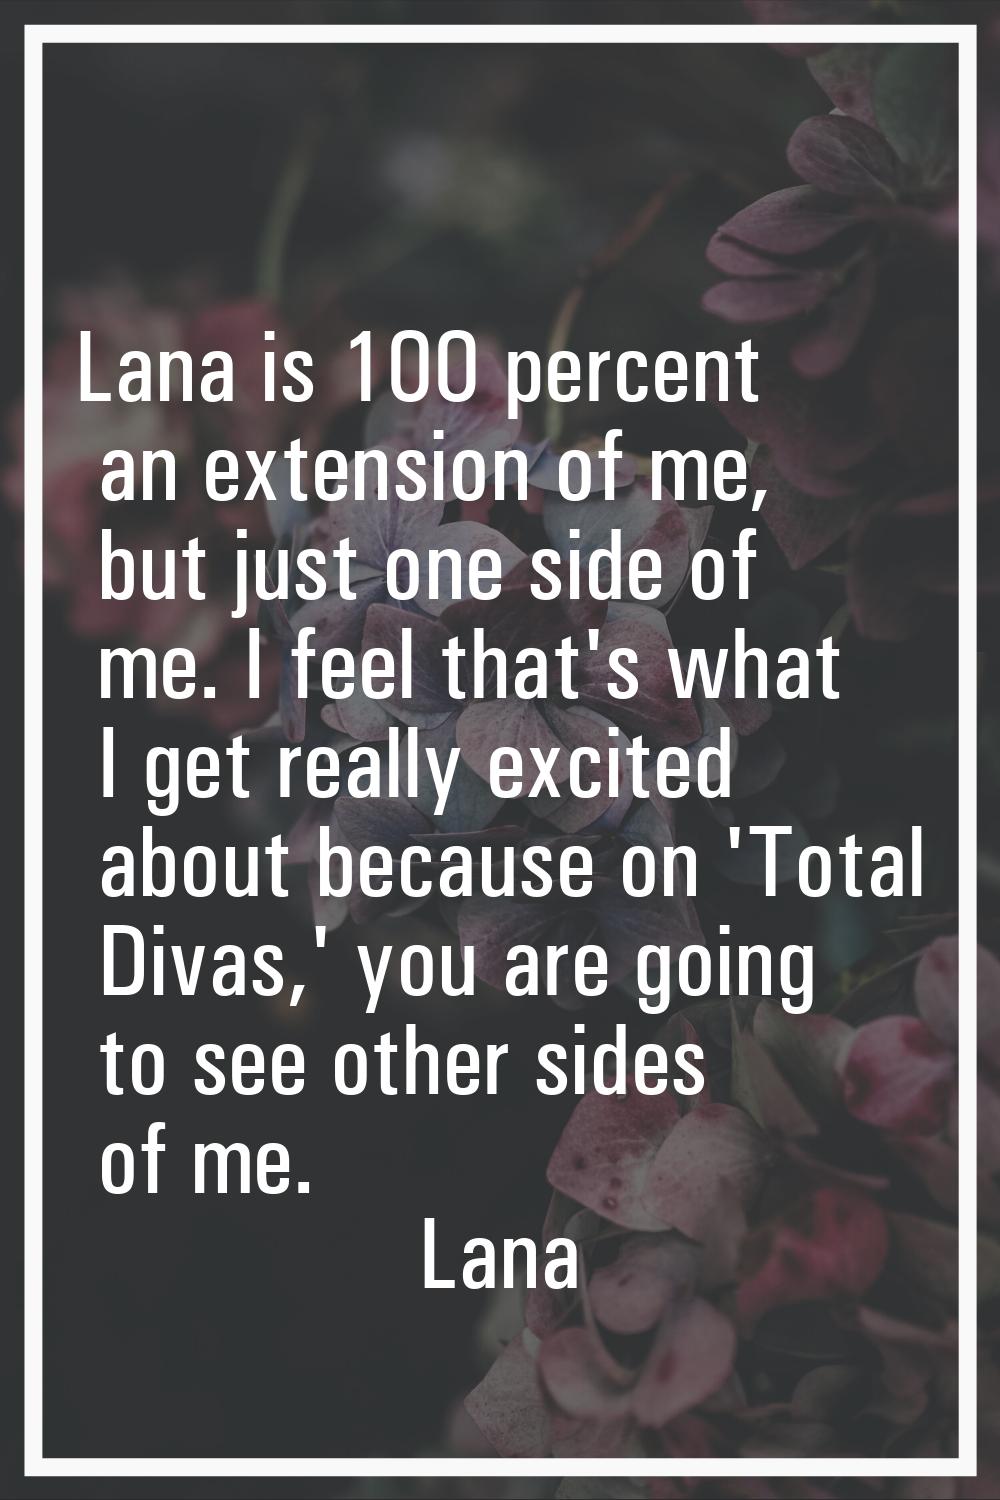 Lana is 100 percent an extension of me, but just one side of me. I feel that's what I get really ex